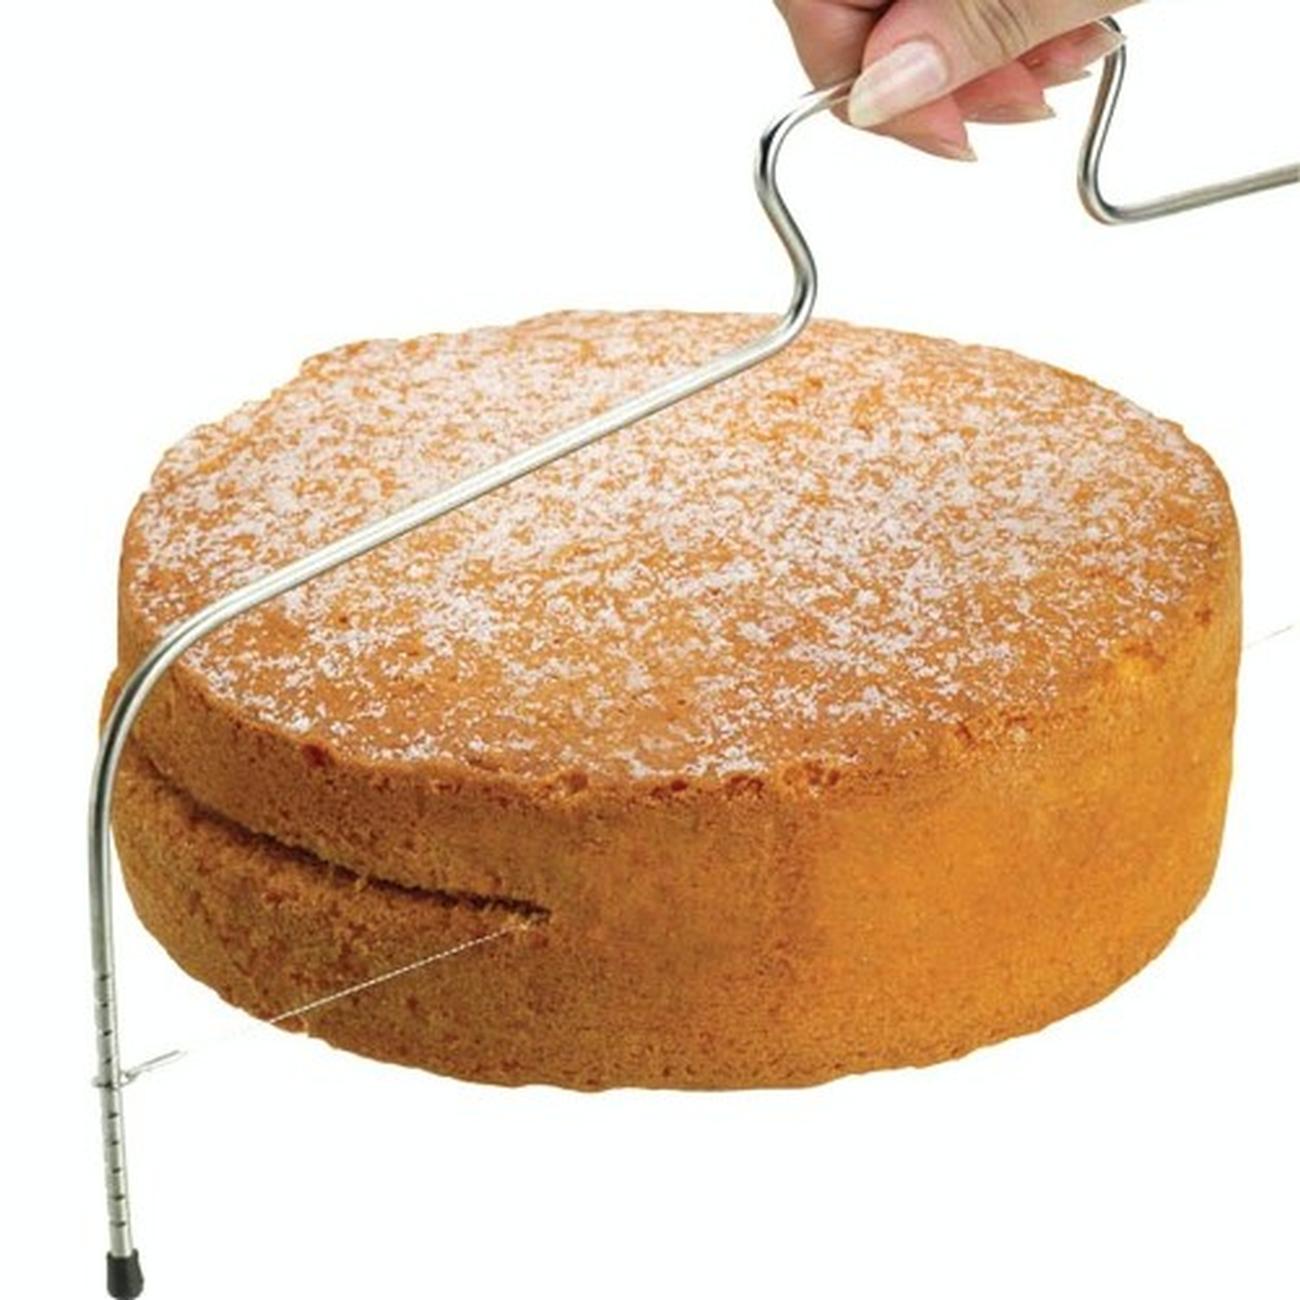 sweetly-does-it-cake-cutting-levelling-wire - Sweetly Does It Cake Cutting Levelling Wire